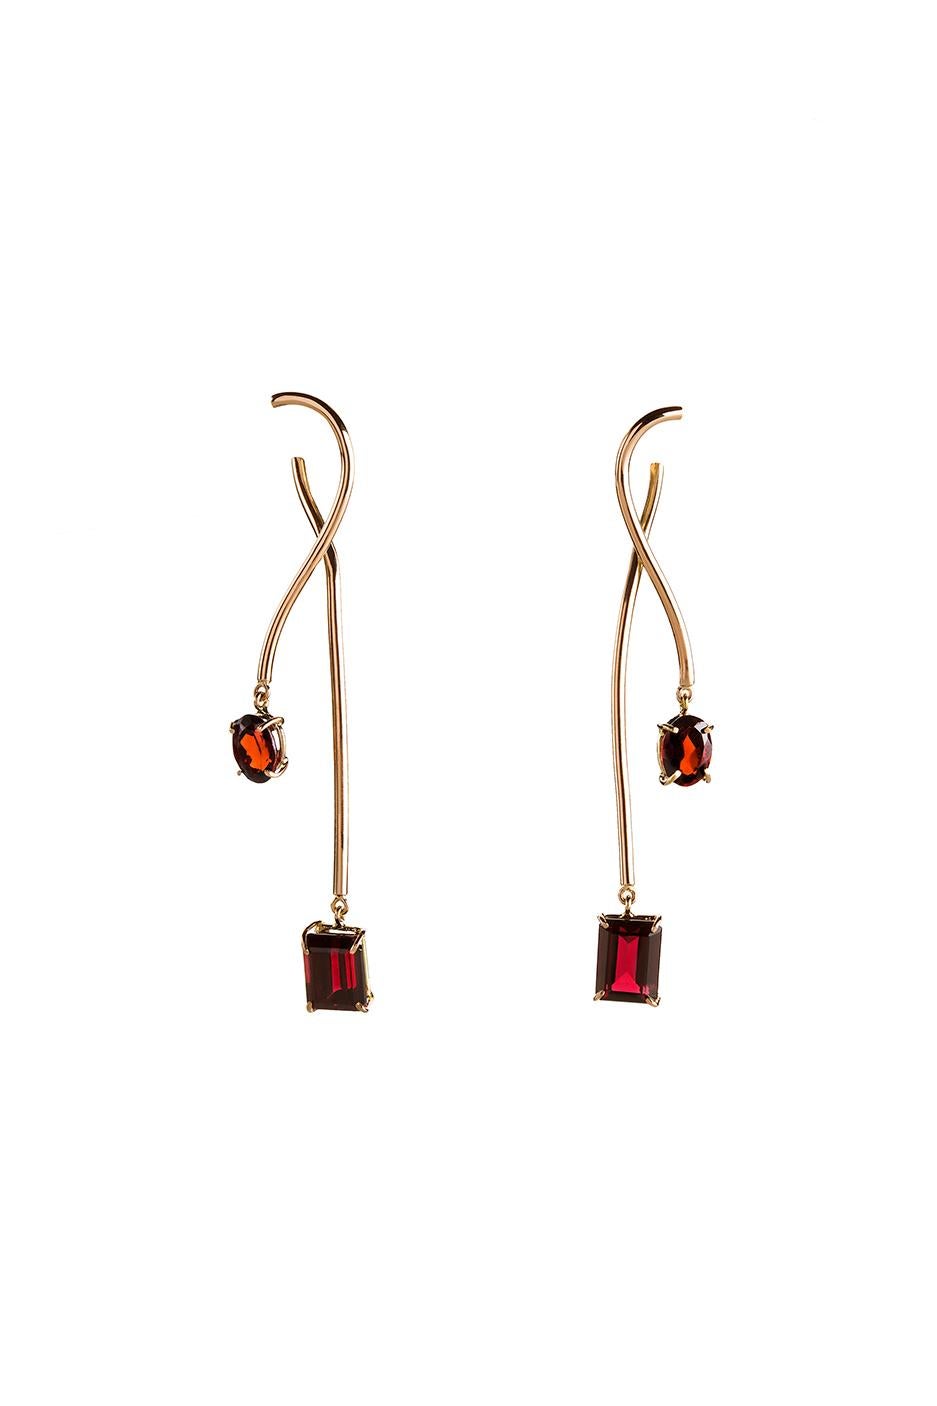 18 Karat Gold Garnet Elegant Handcrafted Linear Pendant Modern  Design Earrings
This earrings are made of 18K rose gold and embellished with red garnets.
Available also in yellow gold on request.
dimension: H 7 cm   
H 2.75 in
Garnet promotes